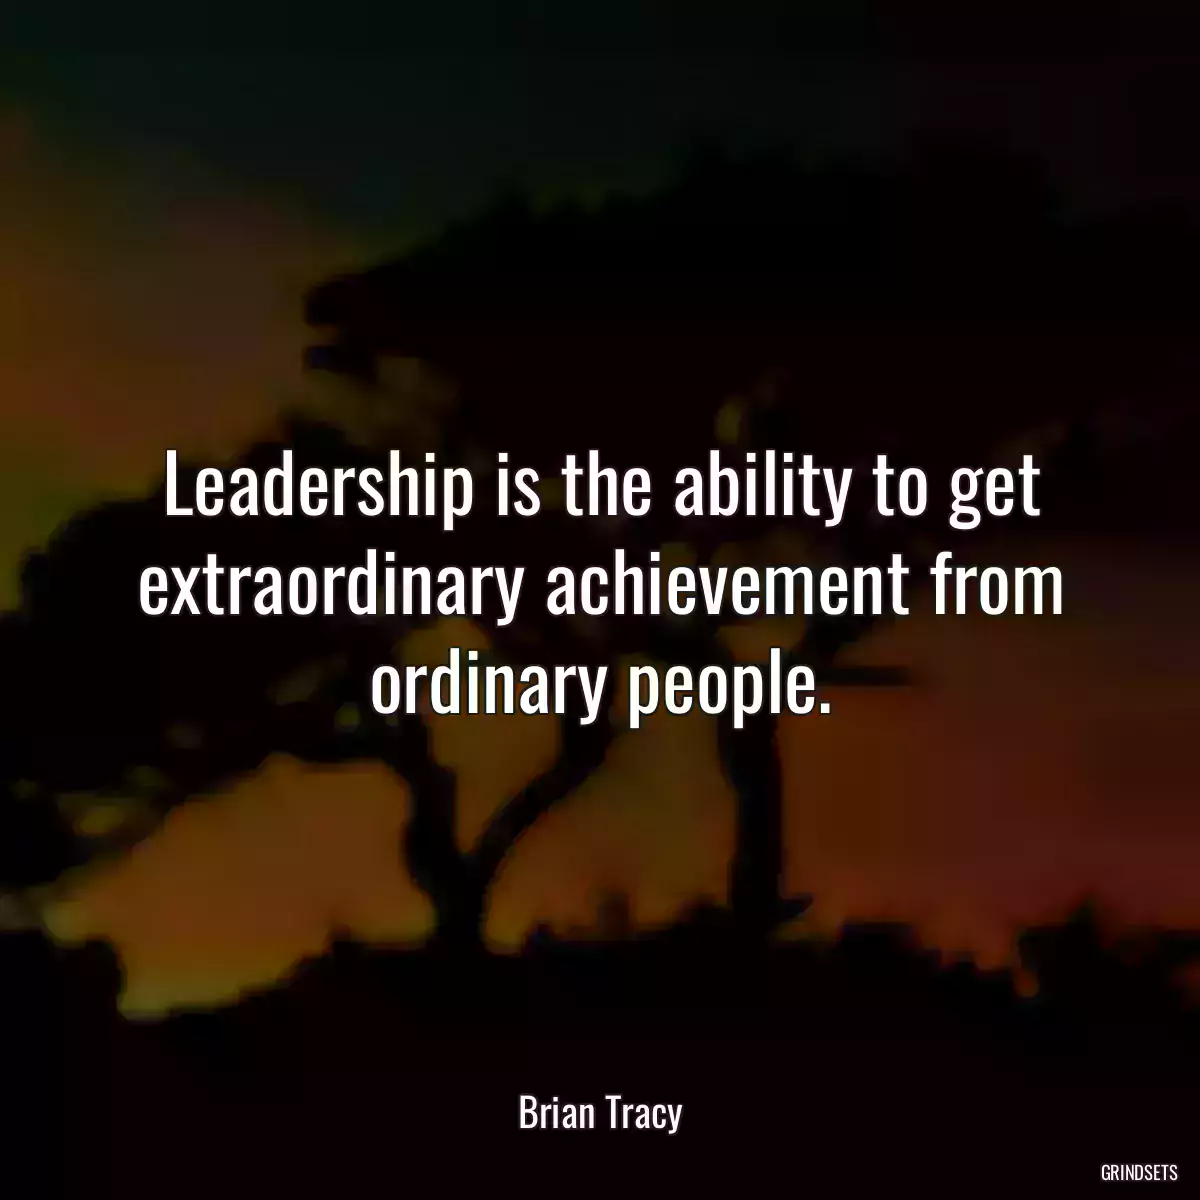 Leadership is the ability to get extraordinary achievement from ordinary people.